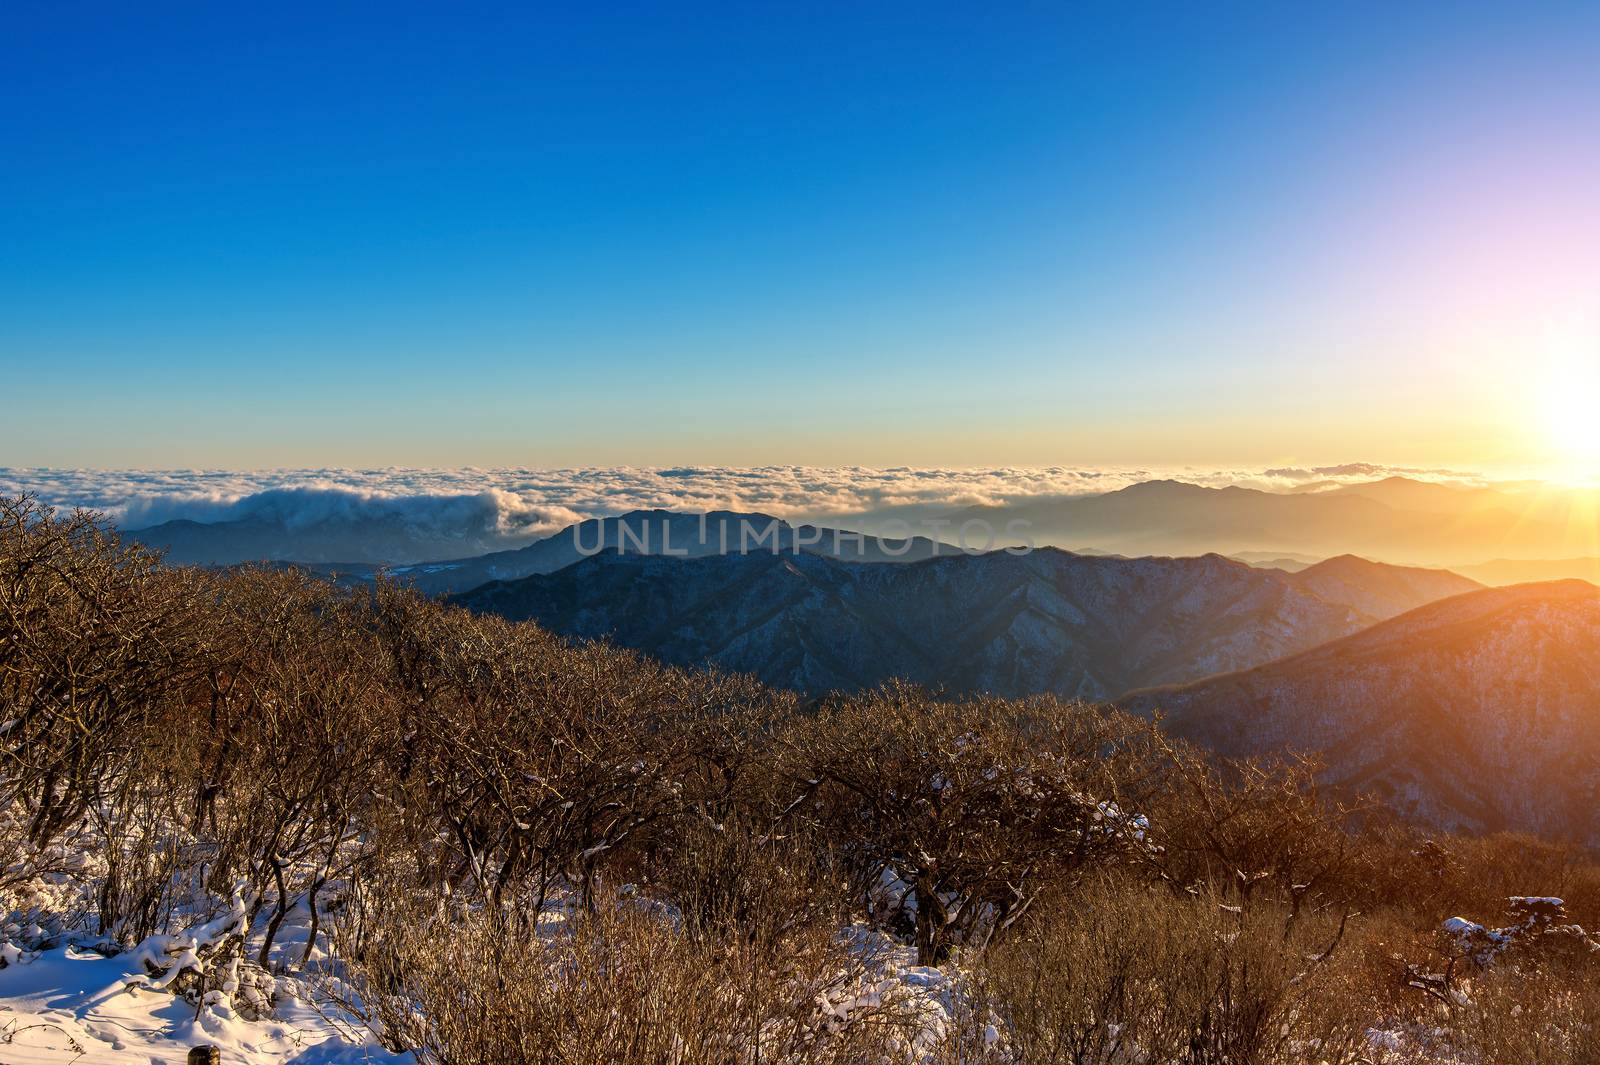 Sunrise with beautiful Lens Flare at Deogyusan mountains in wint by gutarphotoghaphy